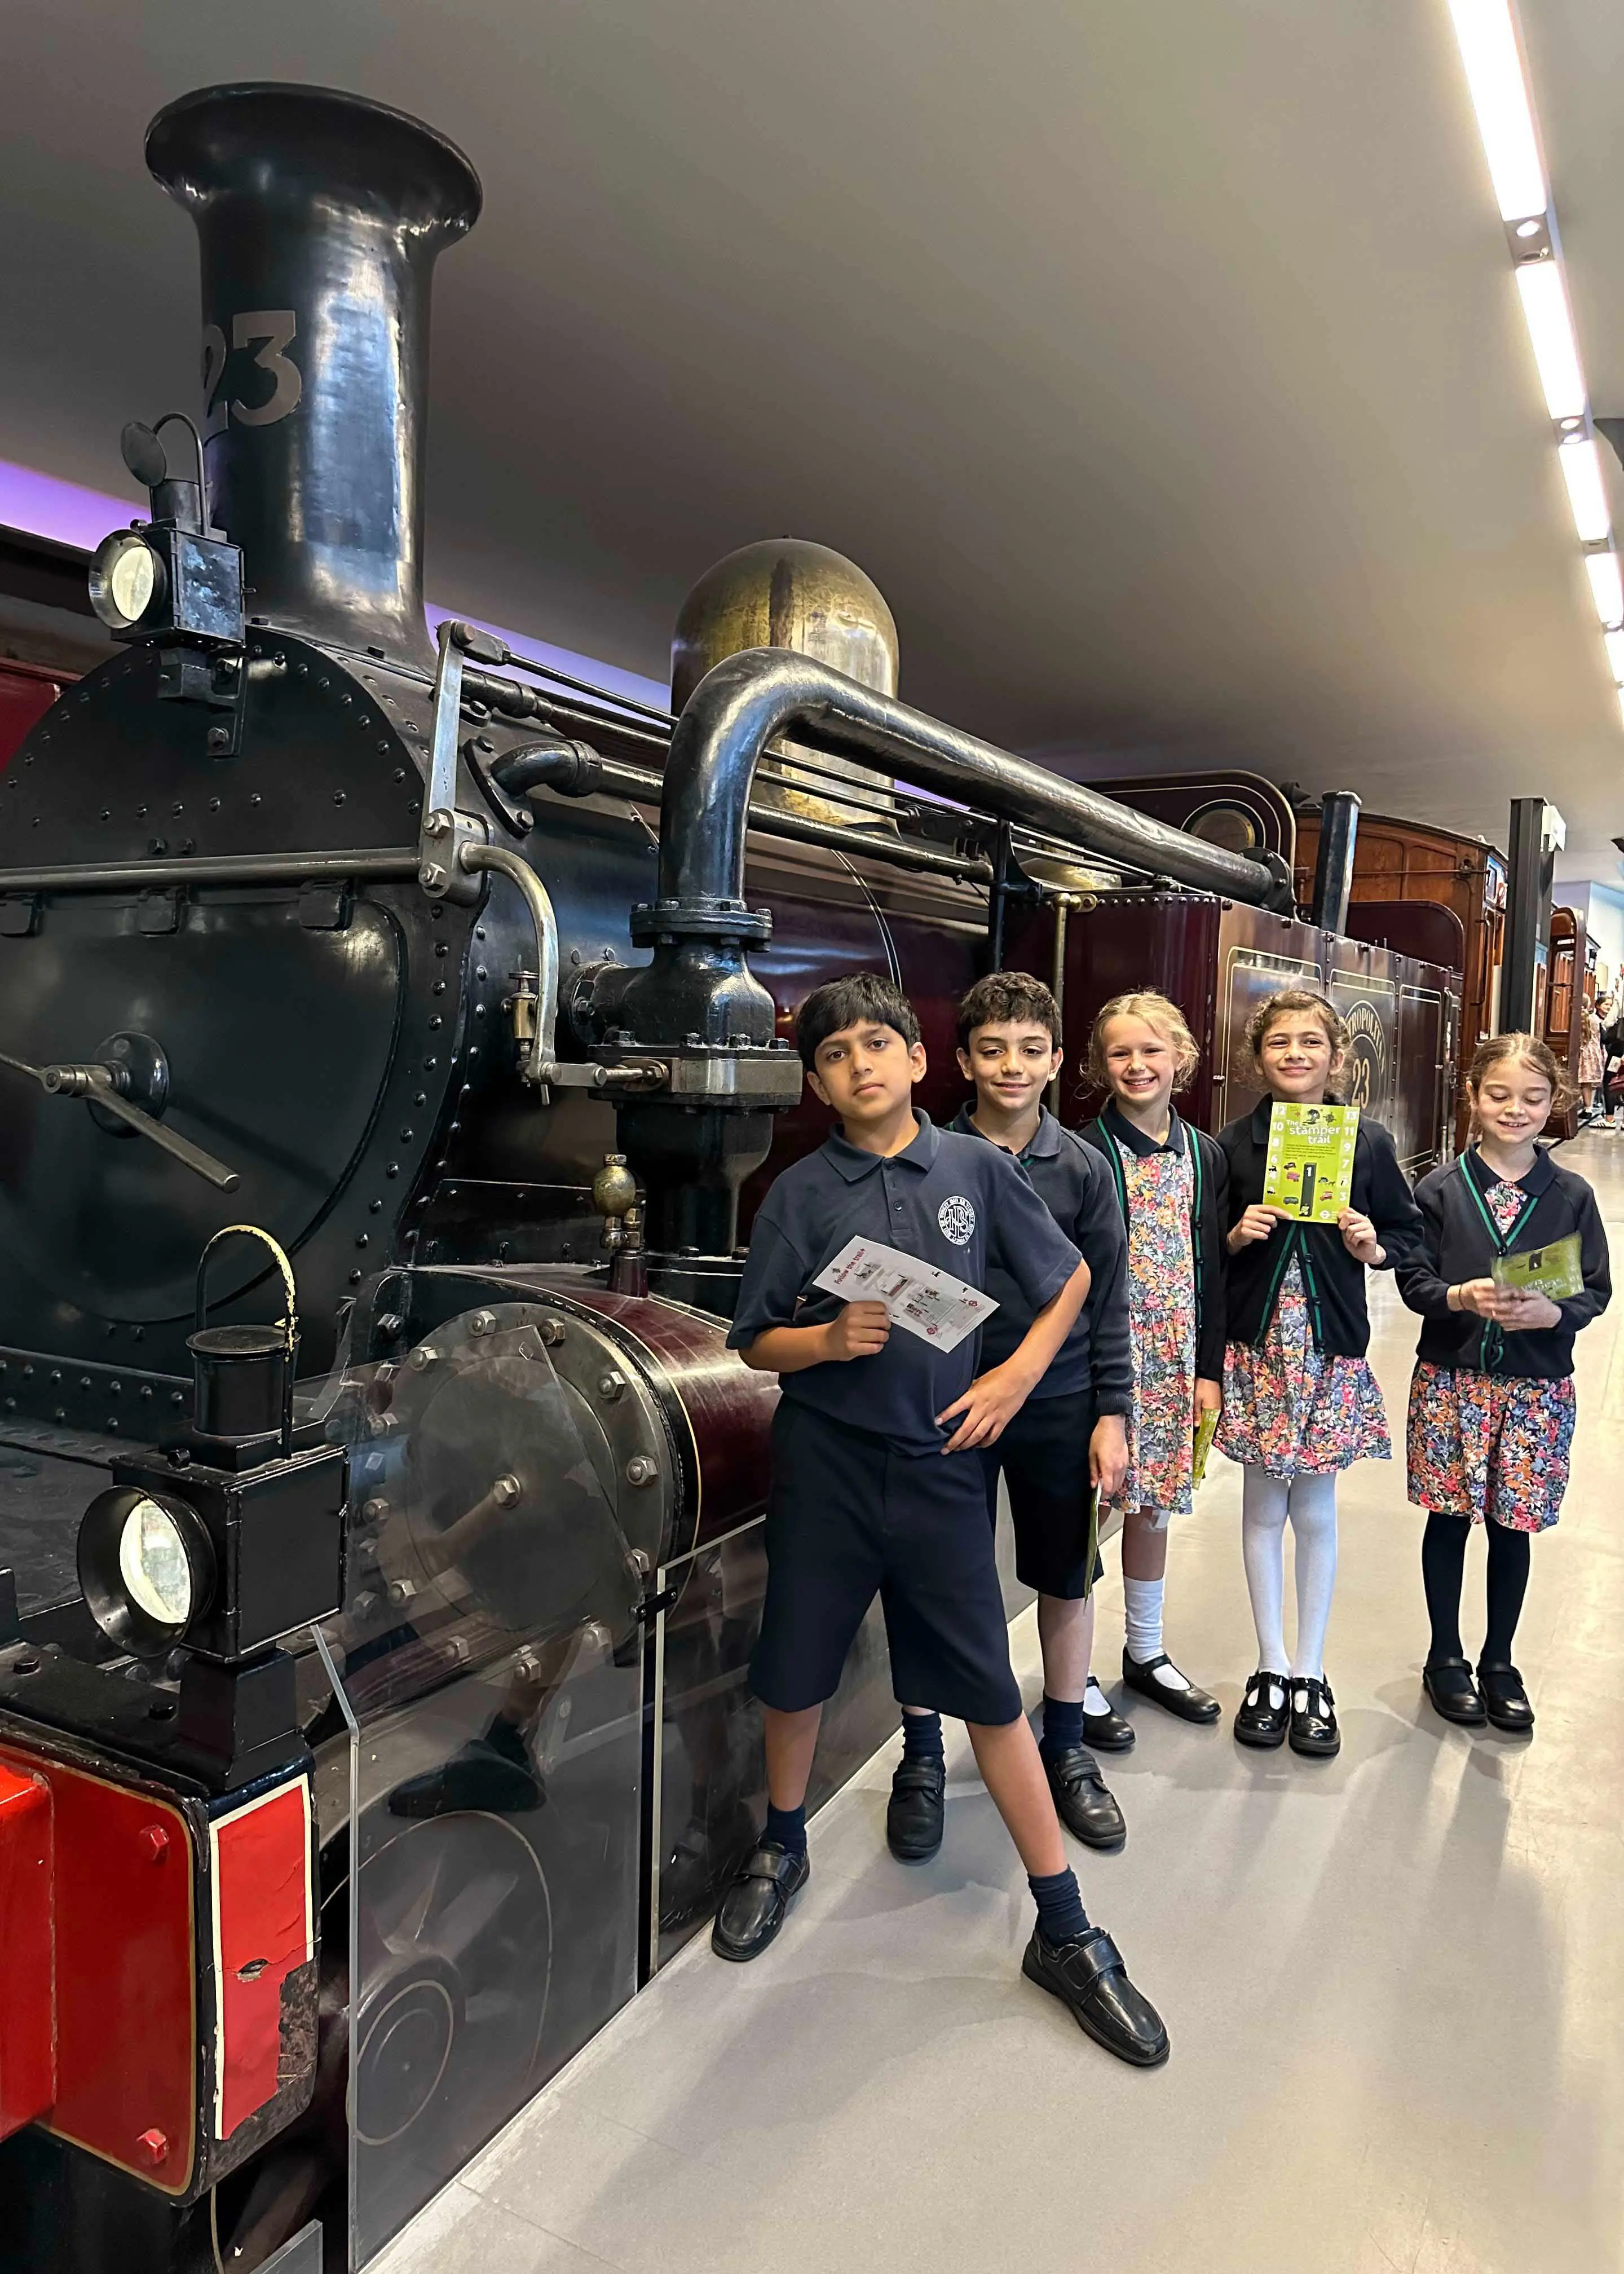 Prep 4 pupils at the London Transport Museum standing in front of steam engine | Ibstock Place School, a private school near Richmond, Barnes, Putney, Kingston, and Wandsworth on an overseas trip. 